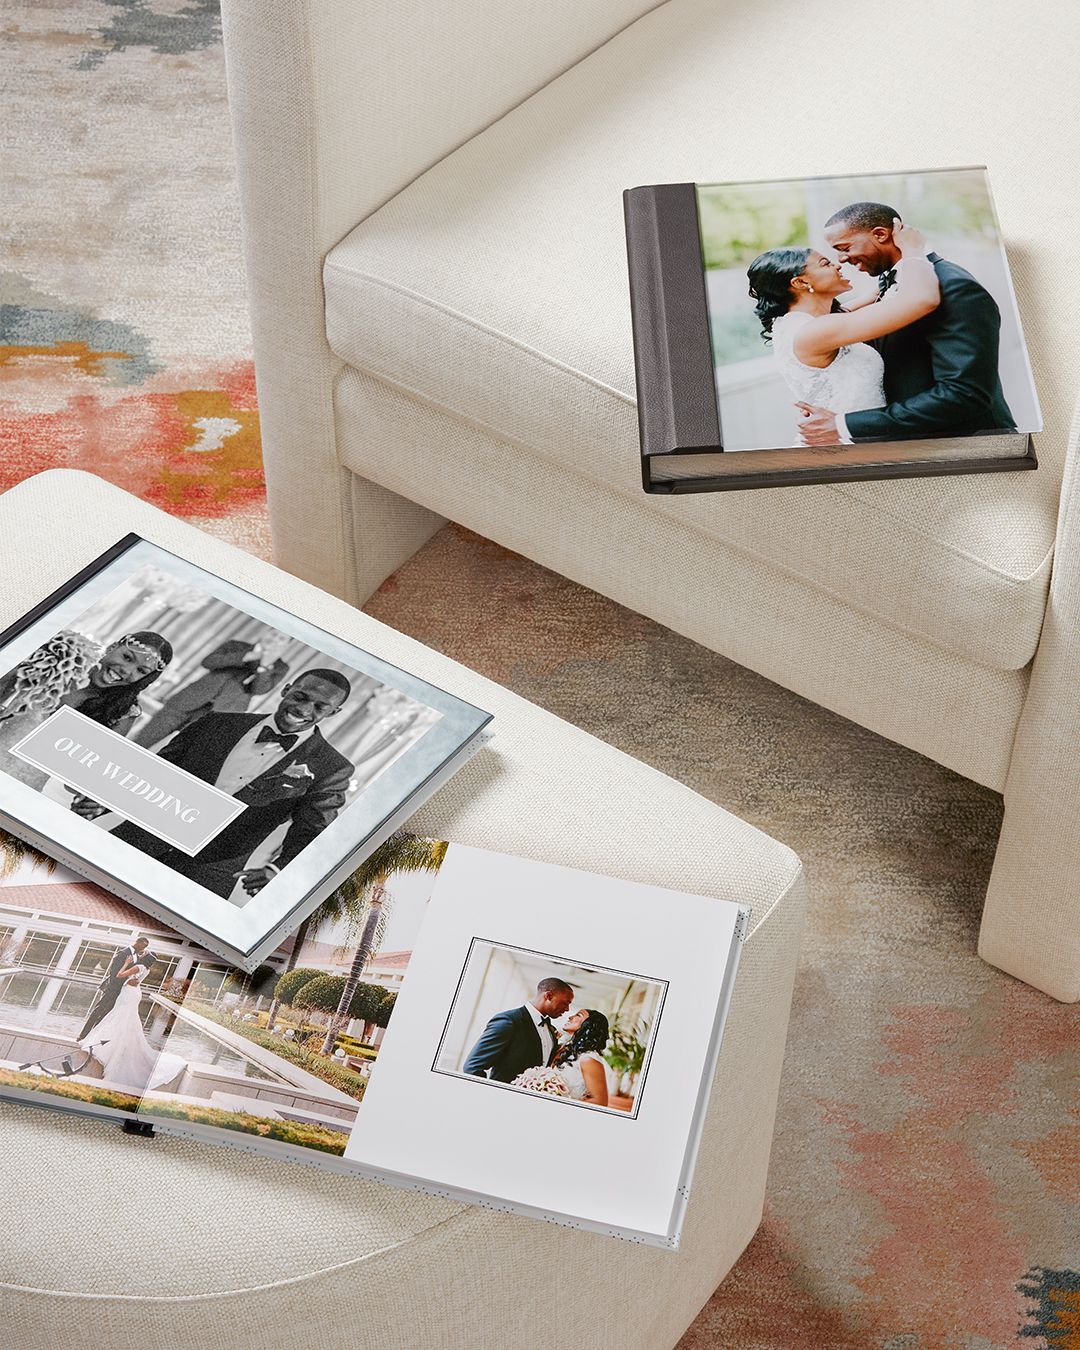 wedding photo albums from shutterfly